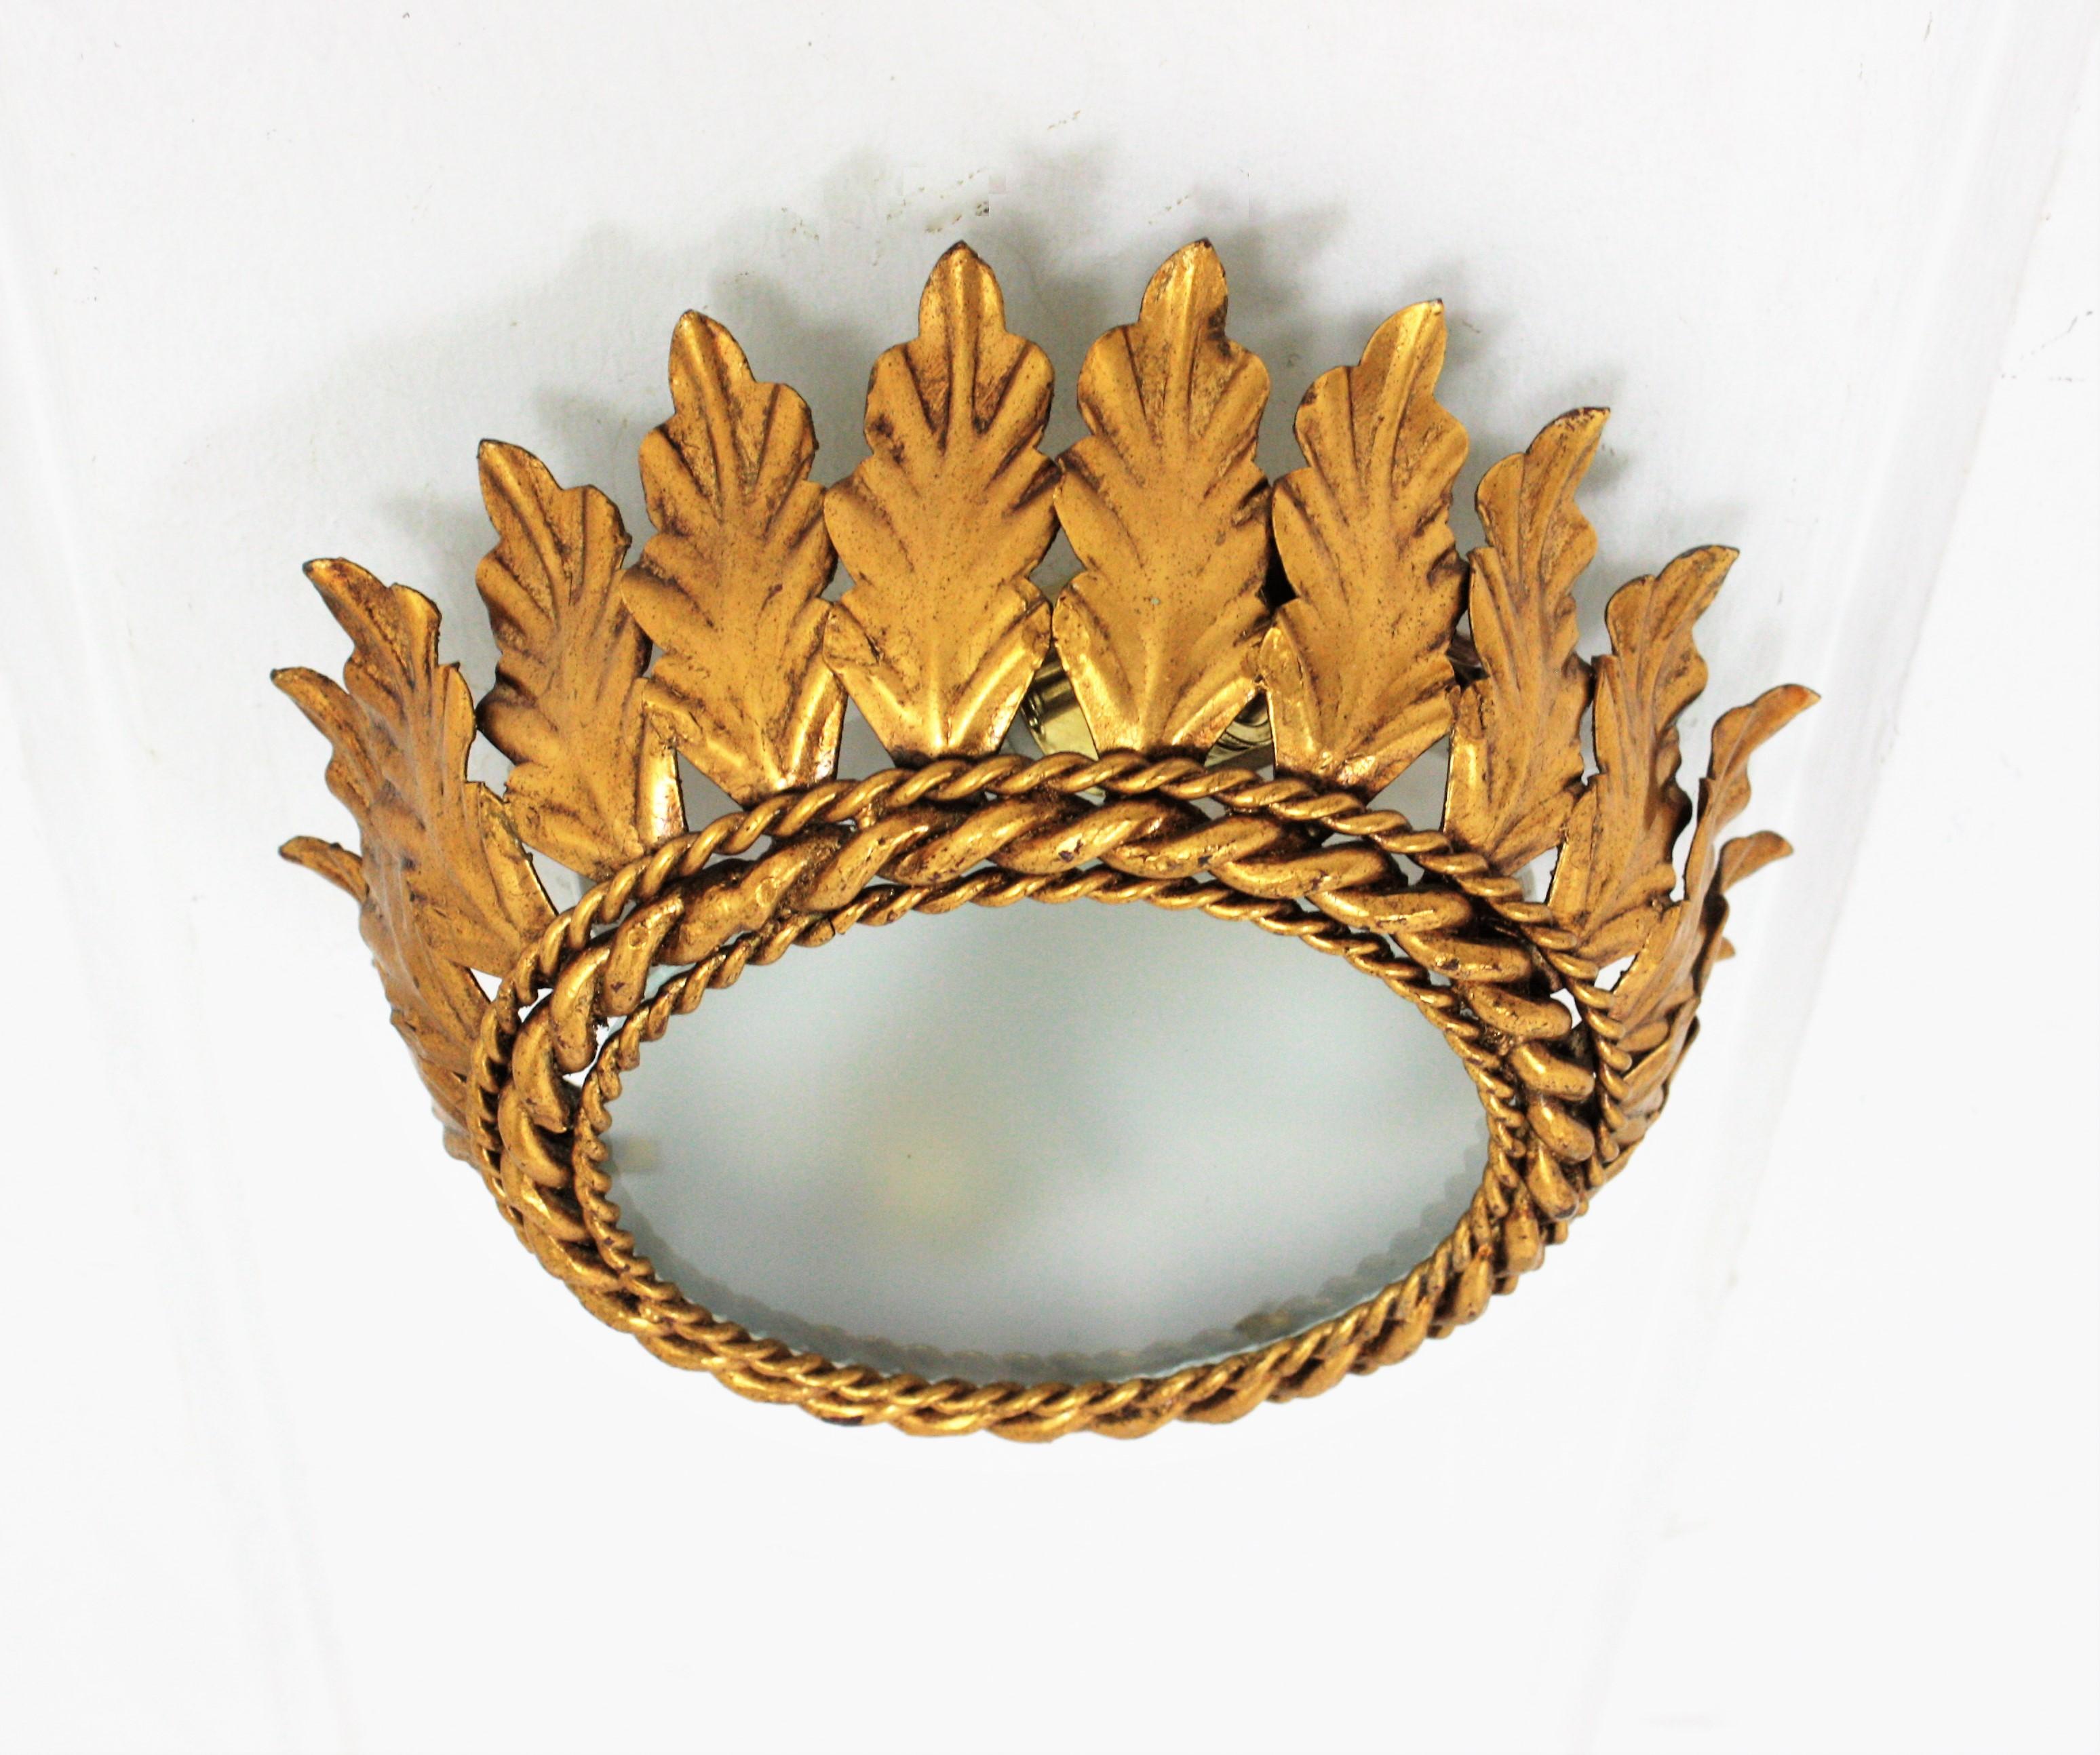 Neoclassical Revival gilt iron leafed crown flush mount with frosted glass shade. Spain, 1940s-1950s.
Handcrafted in Spain at the Mid-Century Modern period in hand-hammered metal with gold leaf gilt finishing. It shows an authentic pretty beautiful